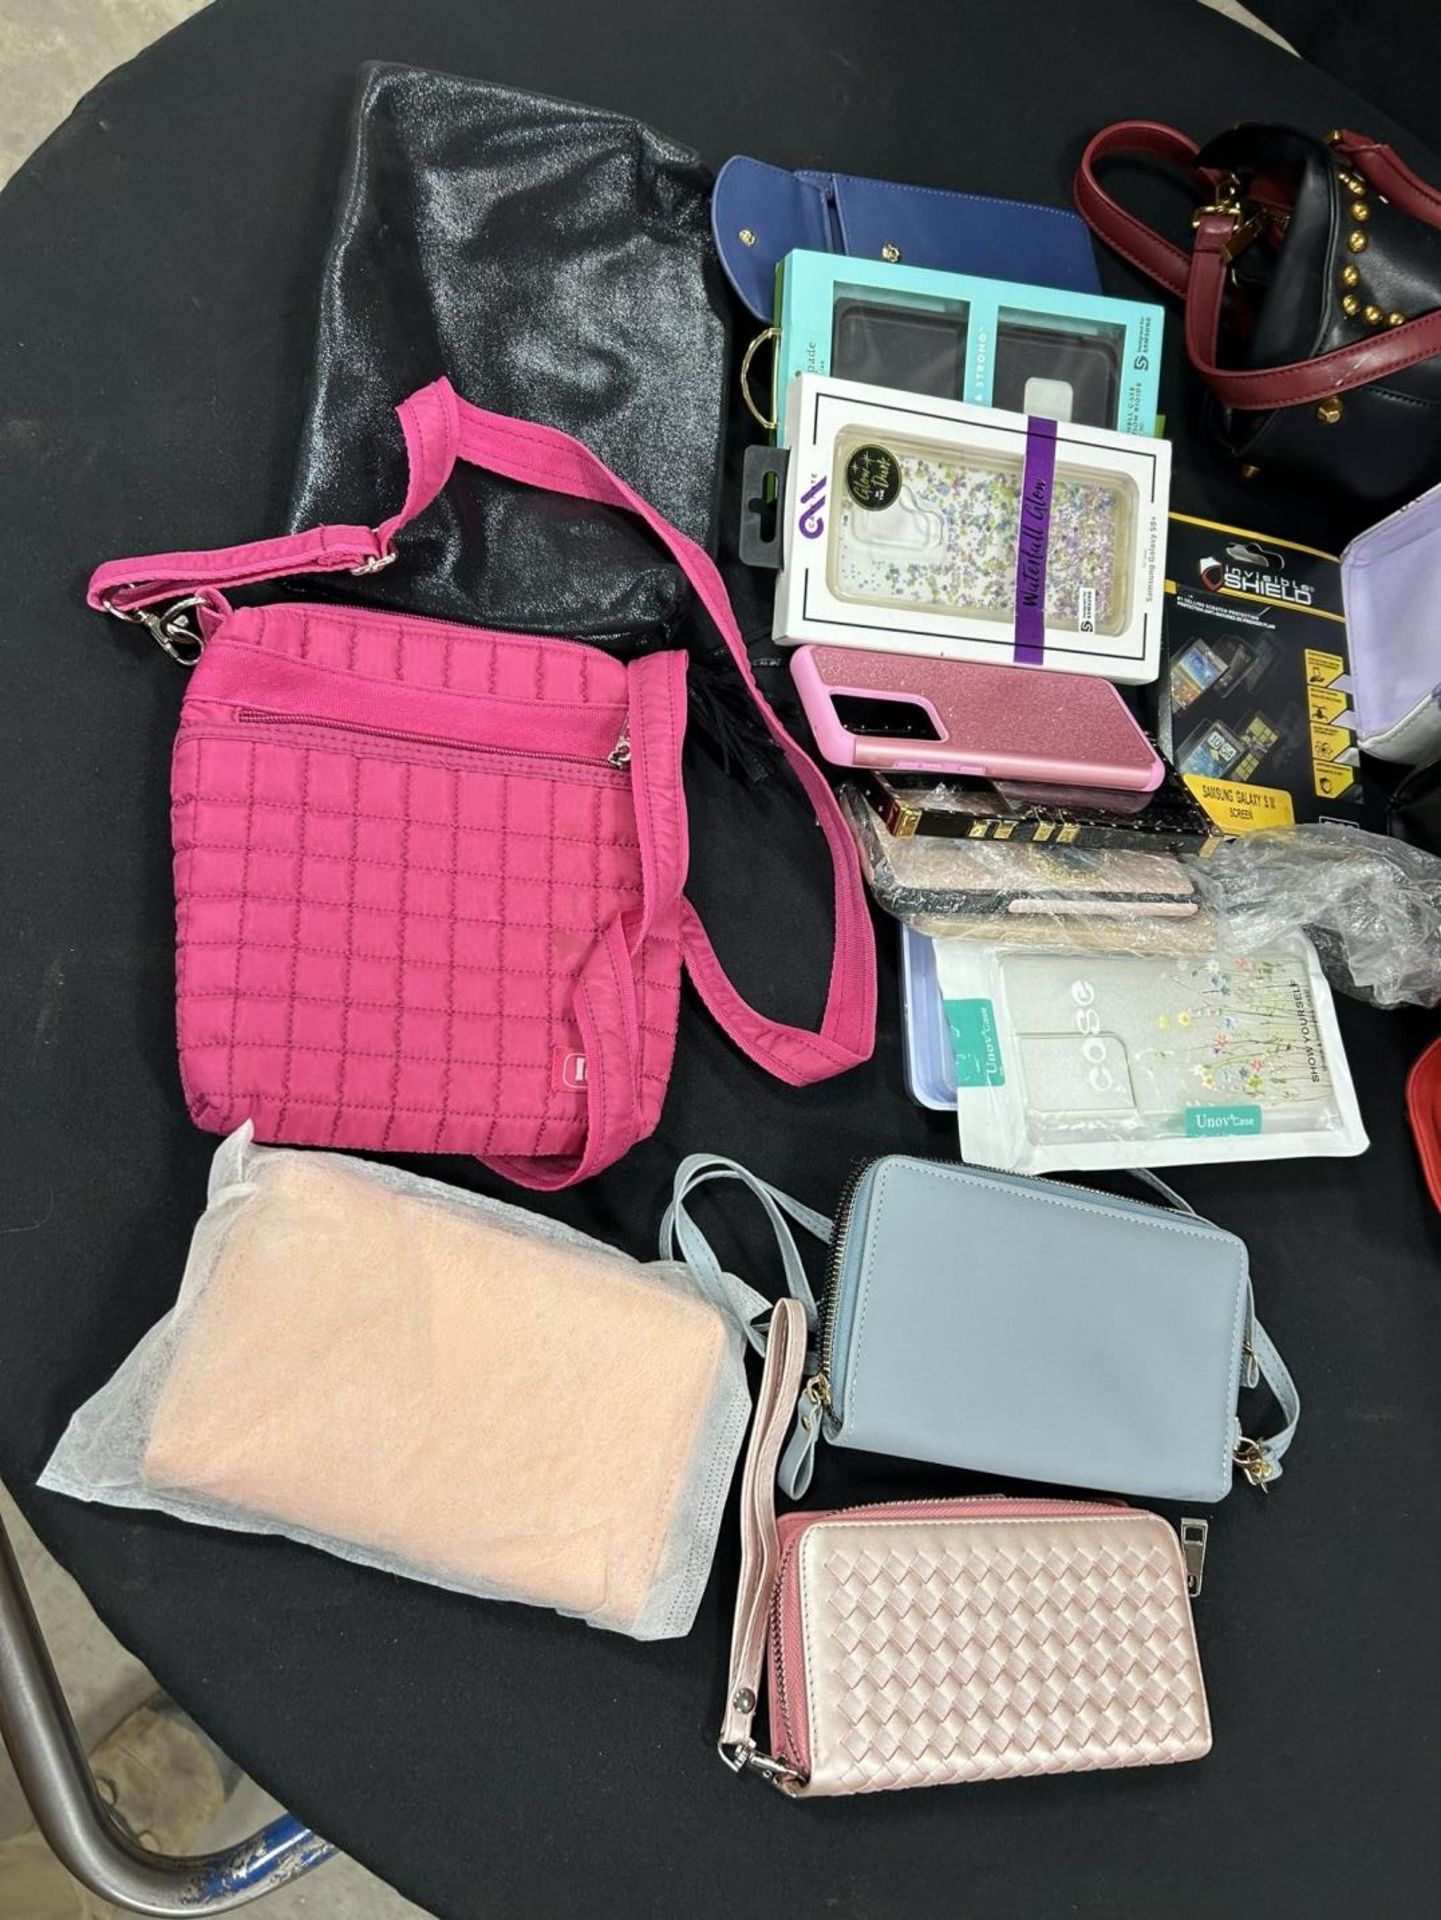 L/O ASSORTED HAND BAGS, PURSE, PHONE CASES, ETC. - Image 2 of 6